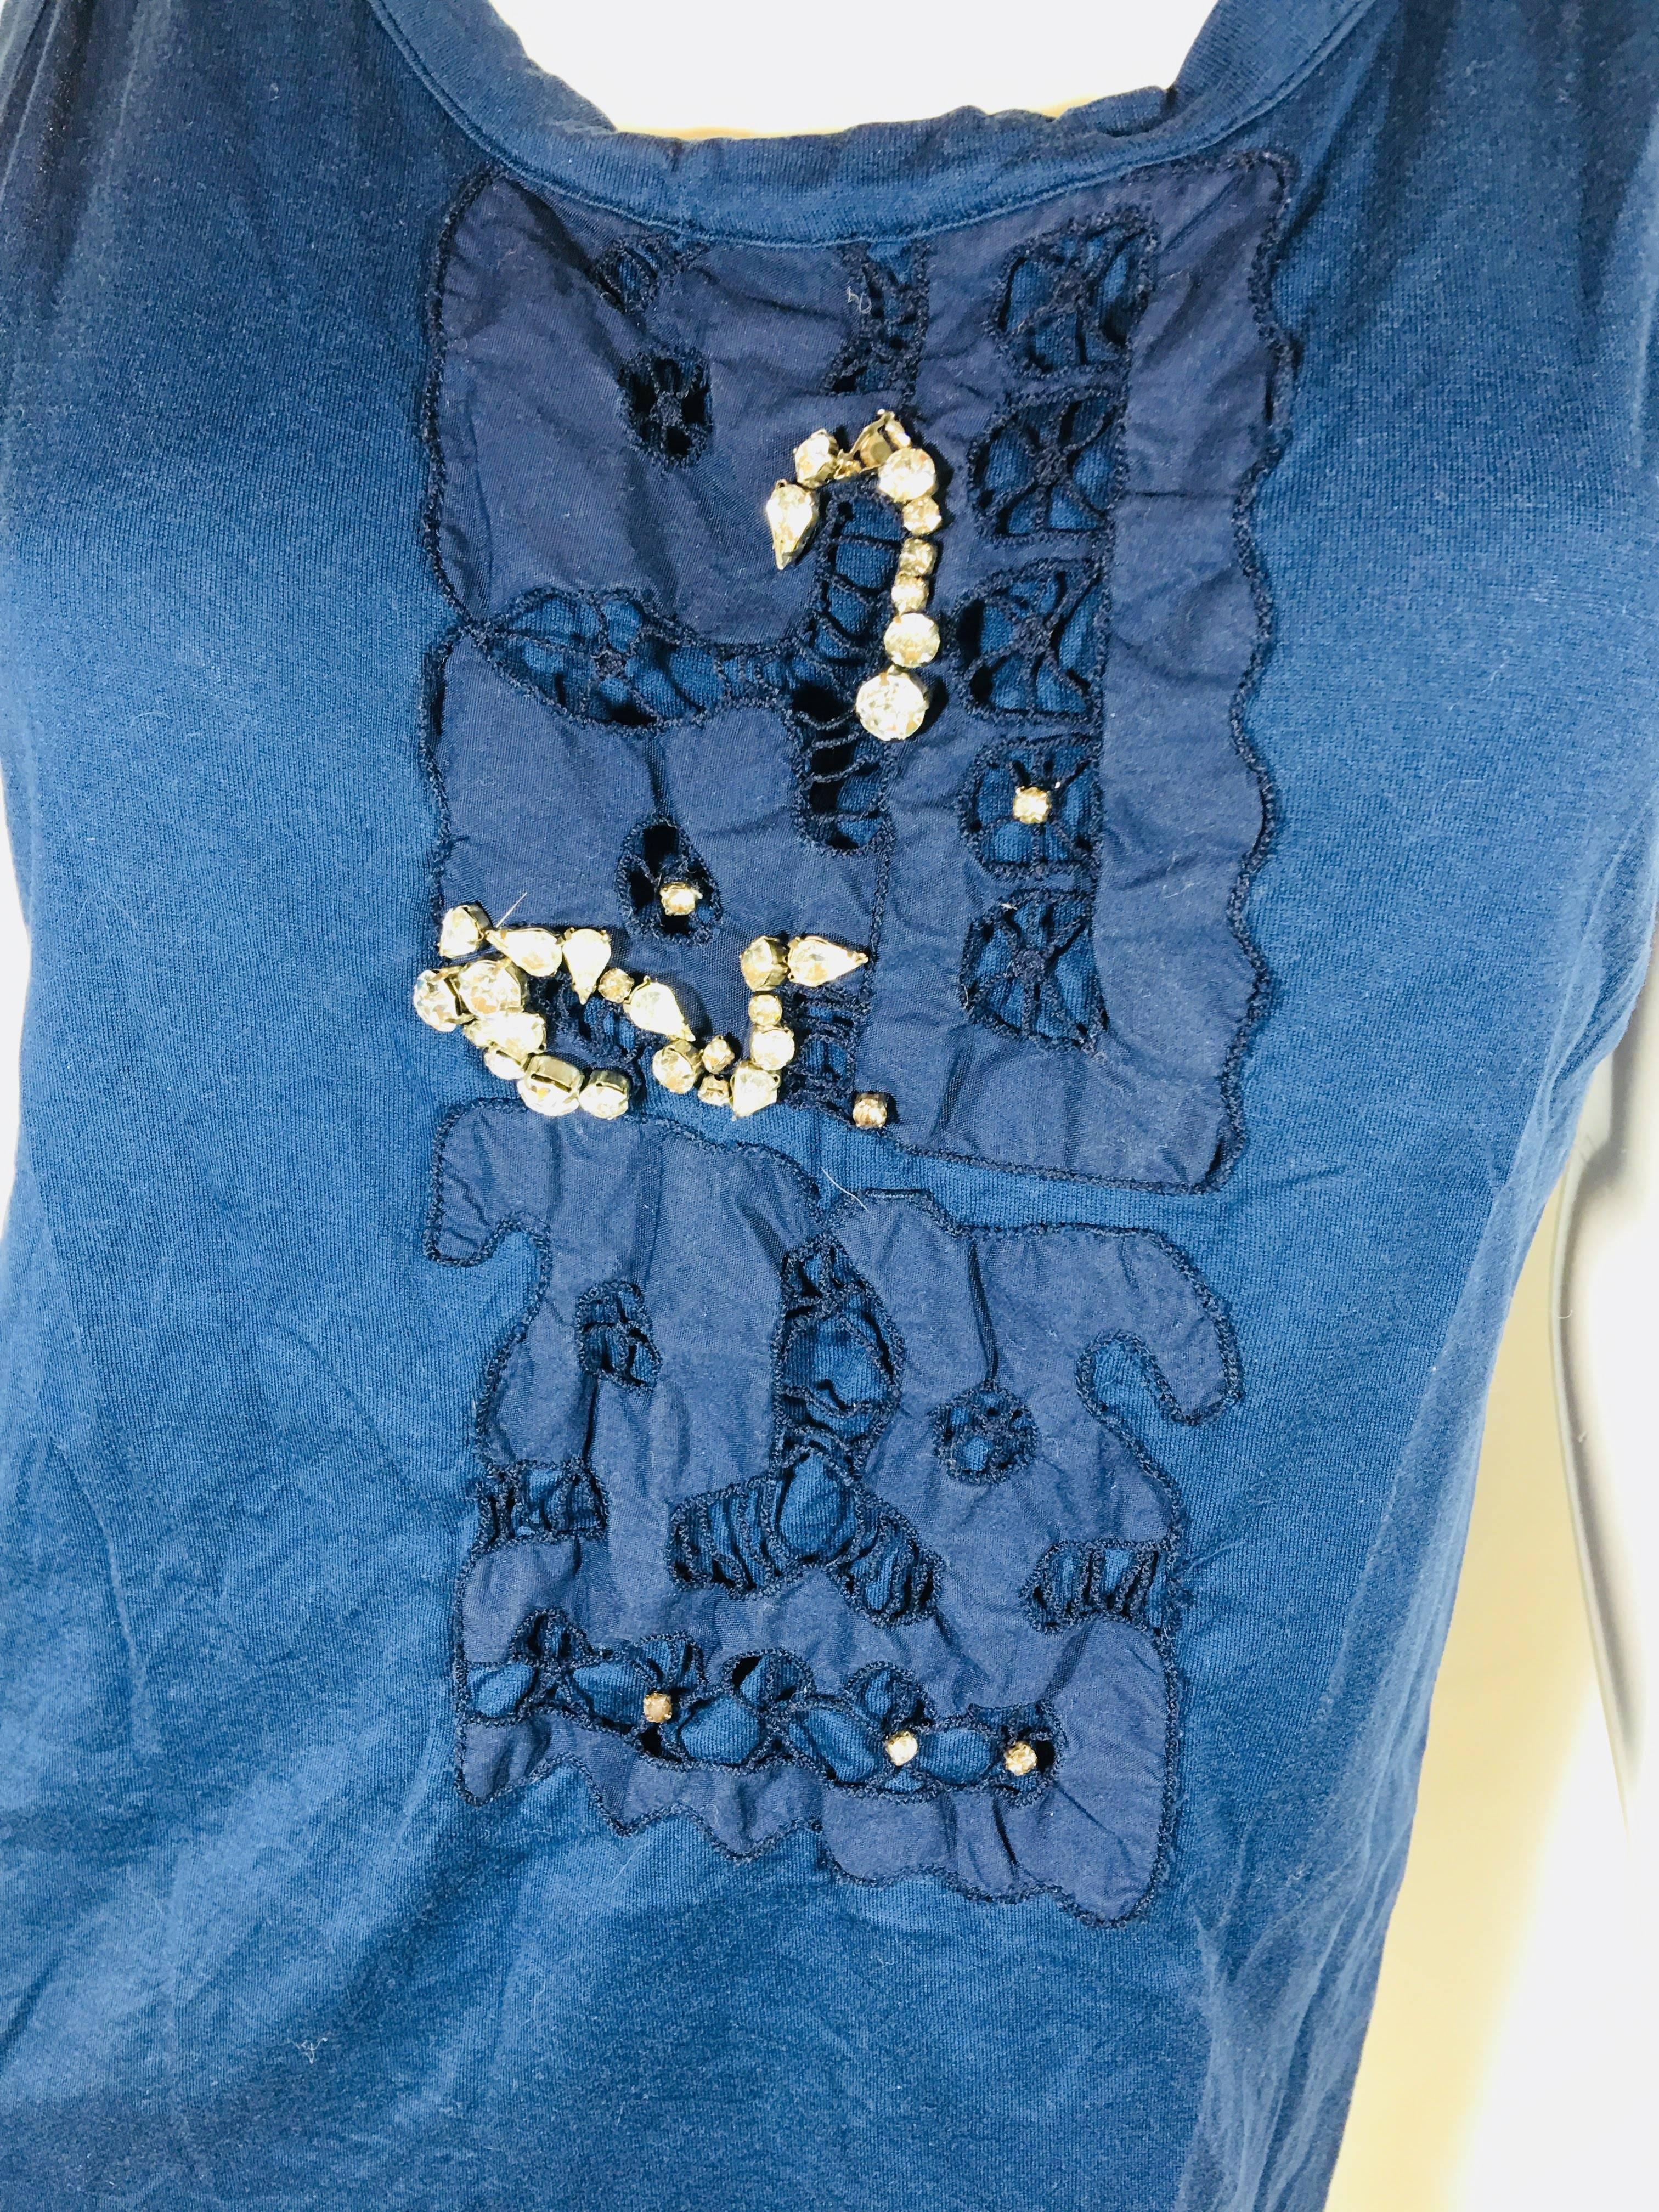 Chloe Tank Top with Lace and Jewel Design.